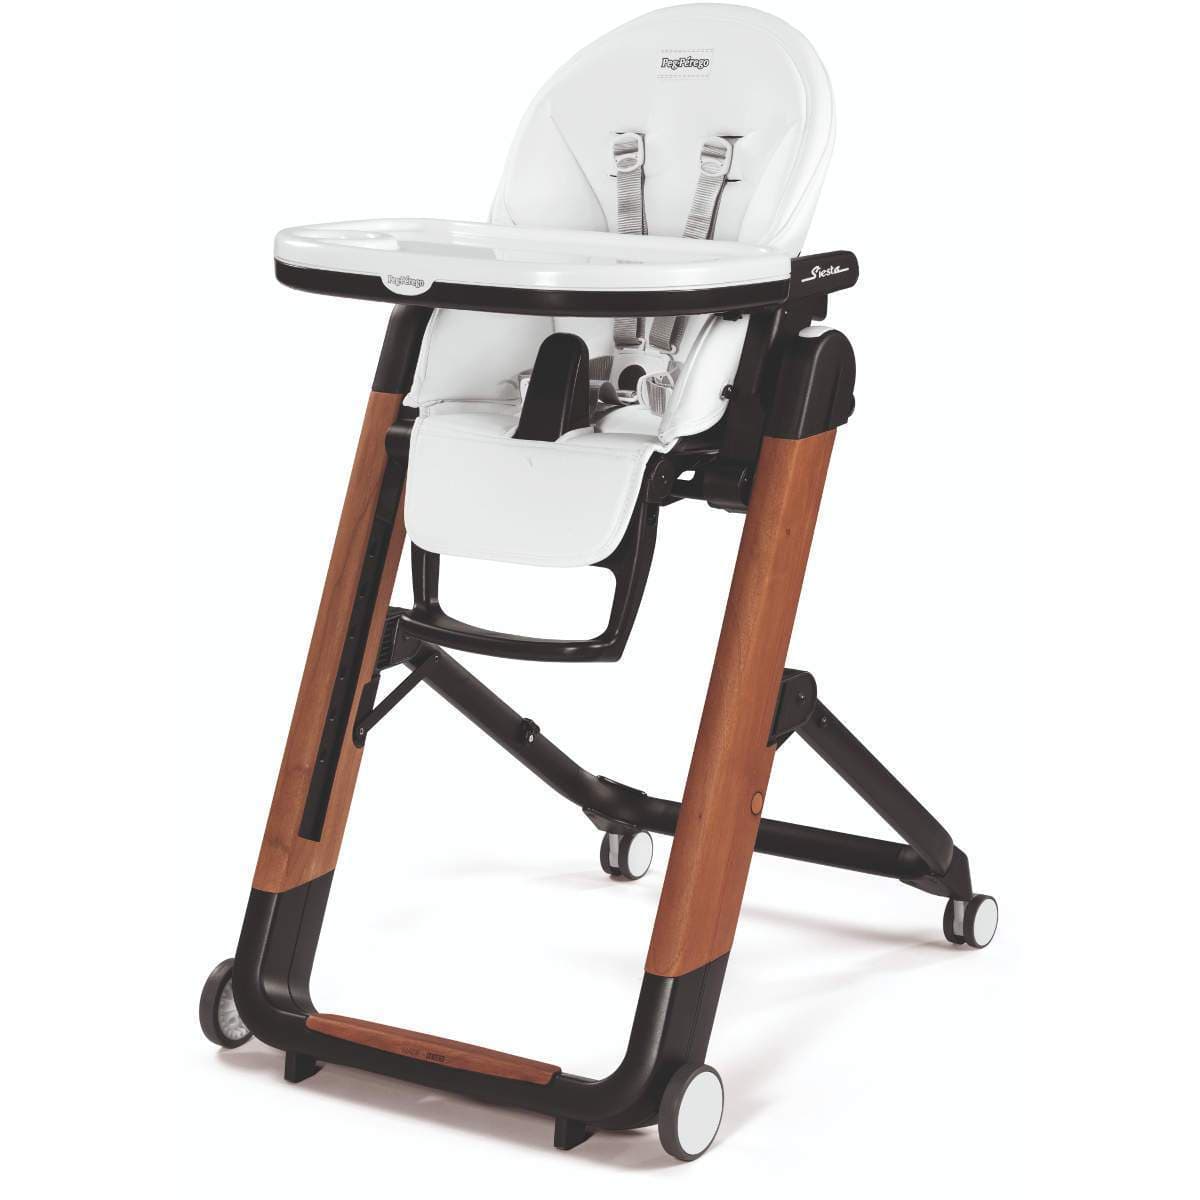 Peg Perego High Chairs & Boosters Ambiance Brown Peg Perego Siesta Ambiance High Chair